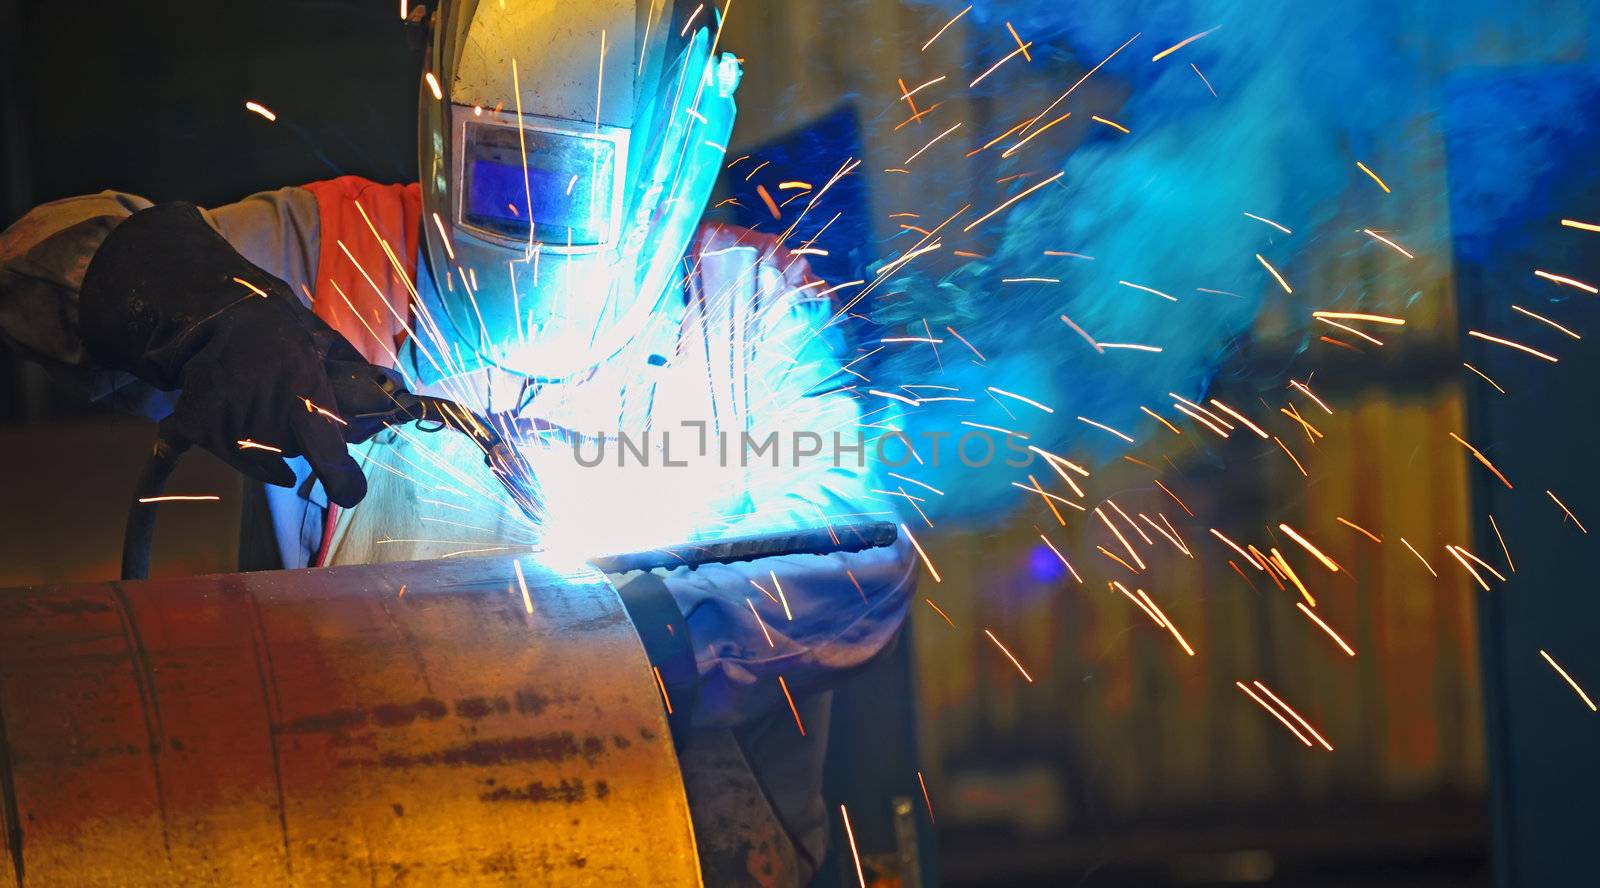 worker with protective mask welding metal and sparks